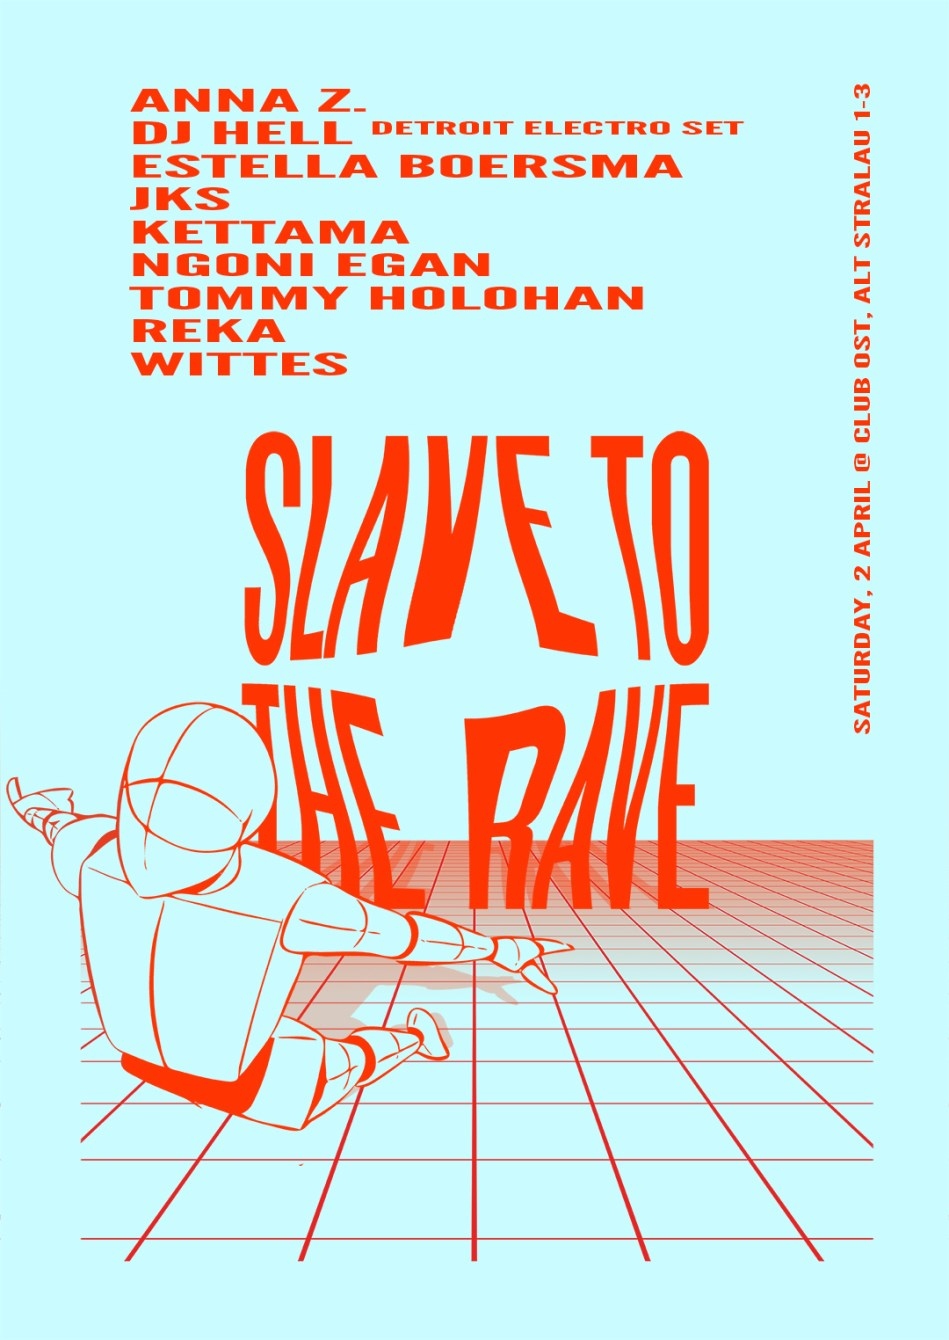 Slave To The Rave with DJ Hell, JKS, Kettama, Reka & more - Flyer front